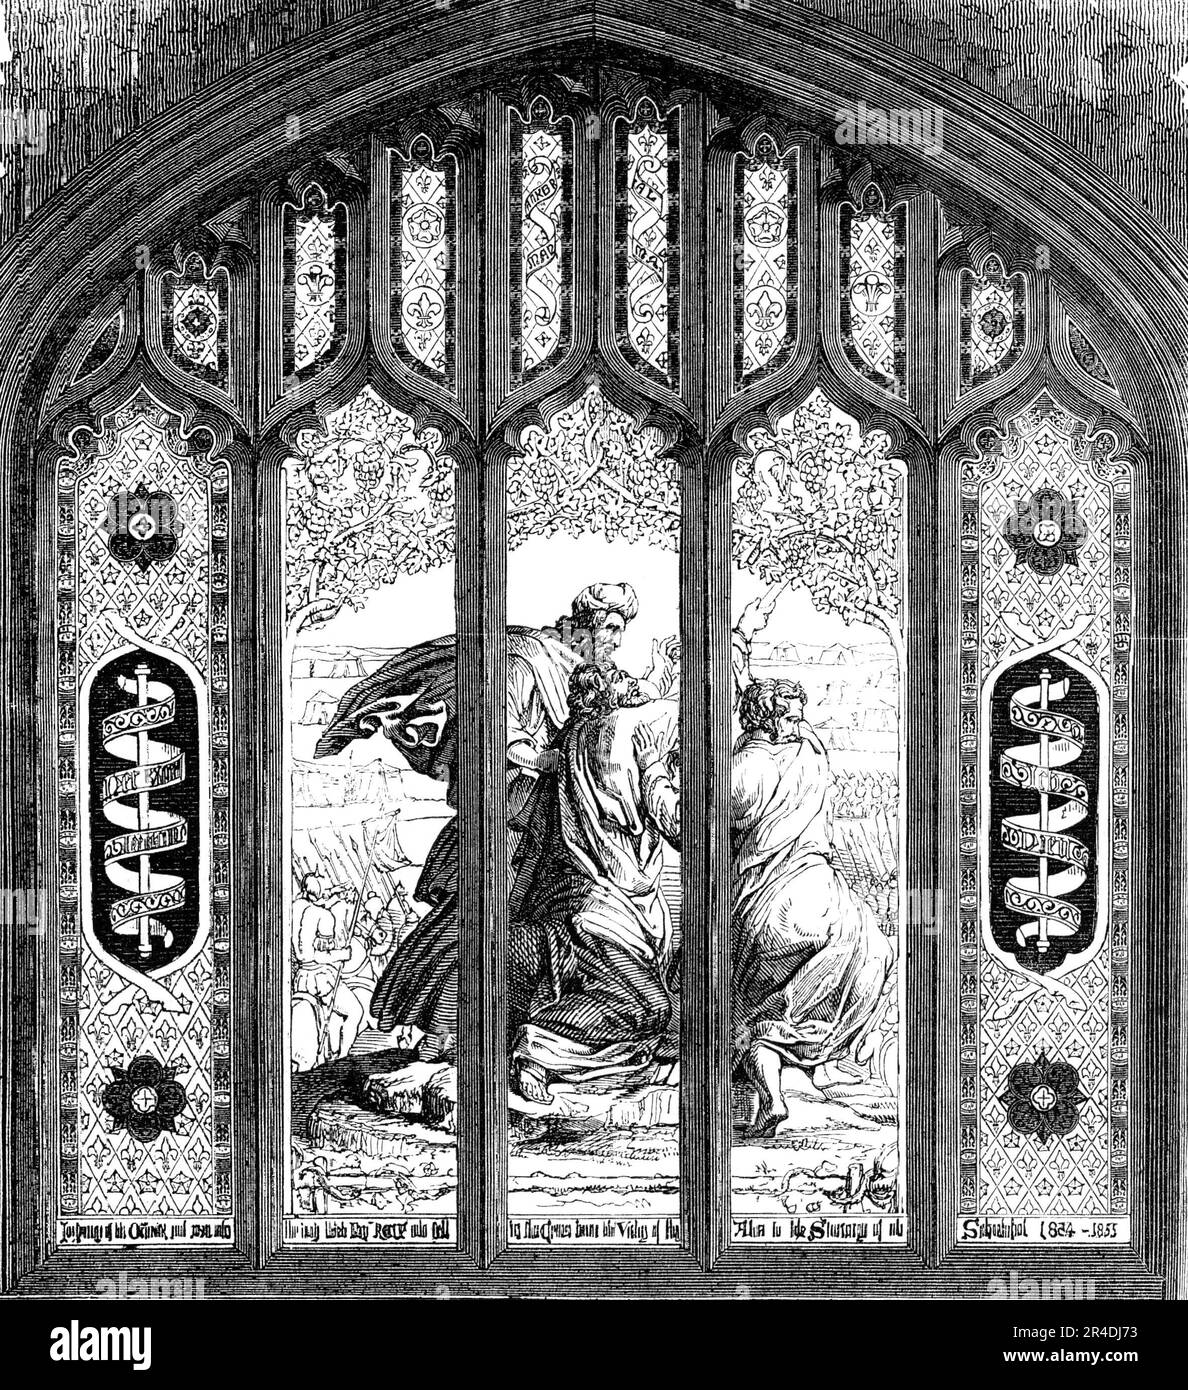 Memorial Window Erected in St. Mary's Church, Chester, to Heroes of the 23rd Royal Welsh Fusiliers, 1856. 'This fine window has been designed and executed by Mr. George Hedgeland...in memory of the heroes...who fell in the Crimea from the victory of the Alma to the capture of Sebastopol. The principal subject represents Aaron and Hur holding up the hands of Moses during the battle between Israel and Amalek...The subject...occupies three of the five lights; the other two bear scrolls, with the mottoes &quot;Ich dien,&quot; and &quot;Nec Aspera terrent,&quot; from the colours of the regiment; fr Stock Photo